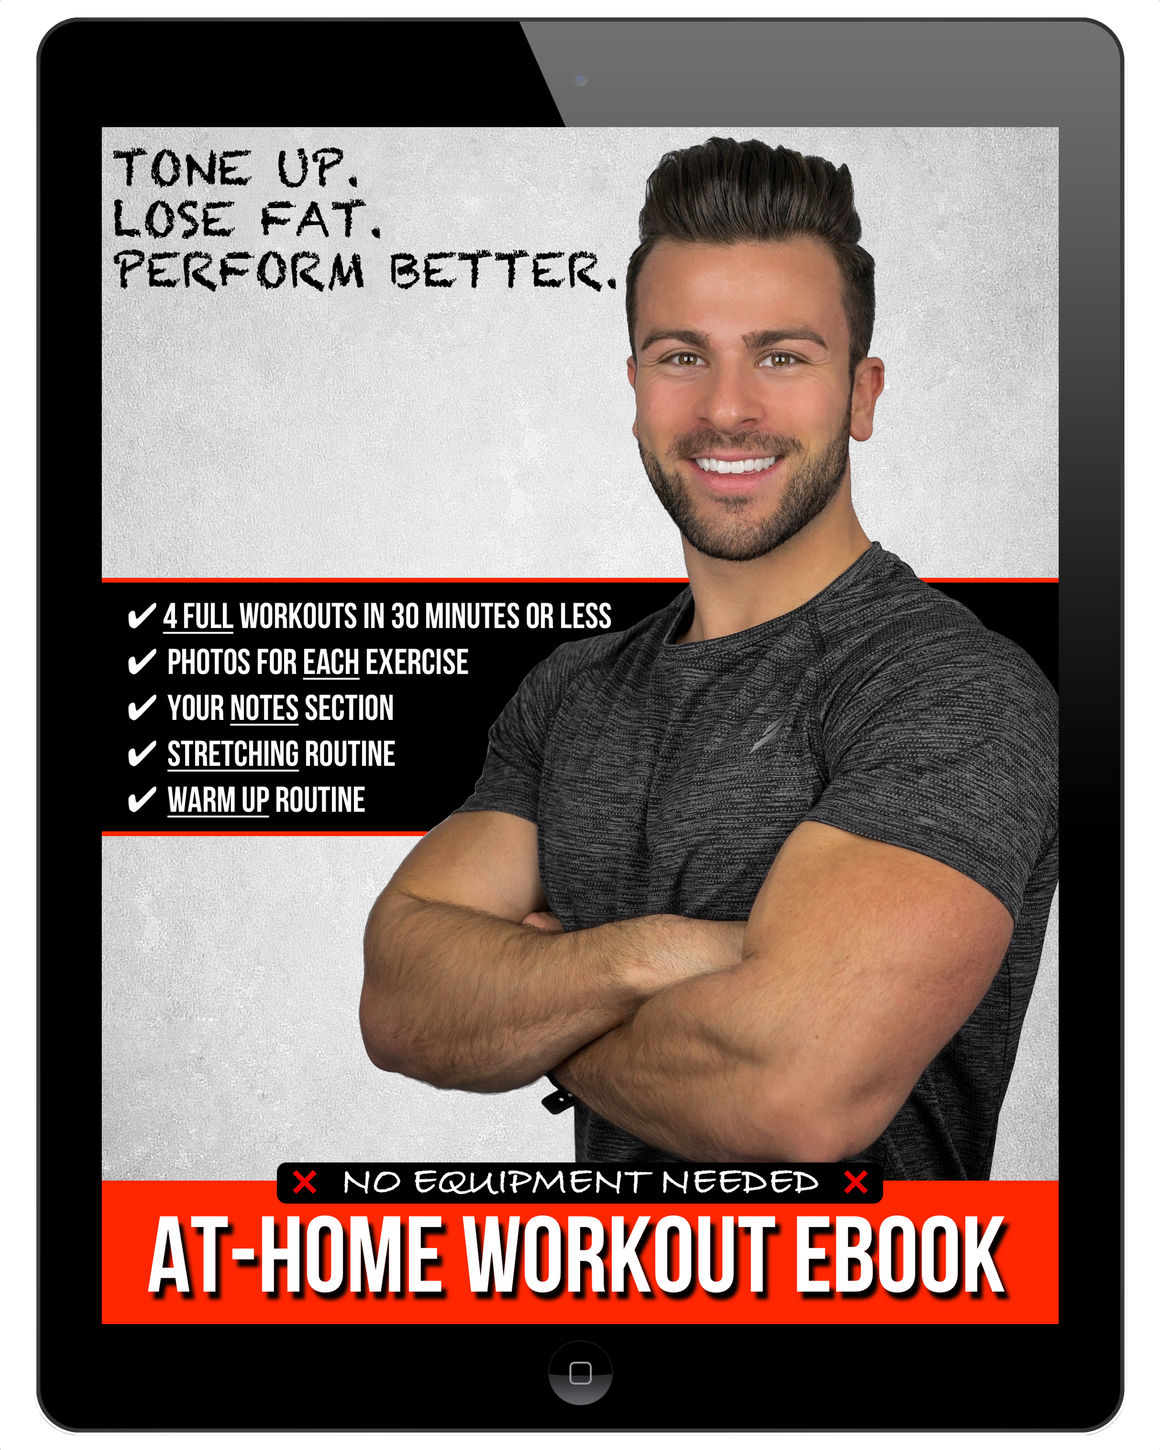 AT-HOME WORKOUT EBOOK